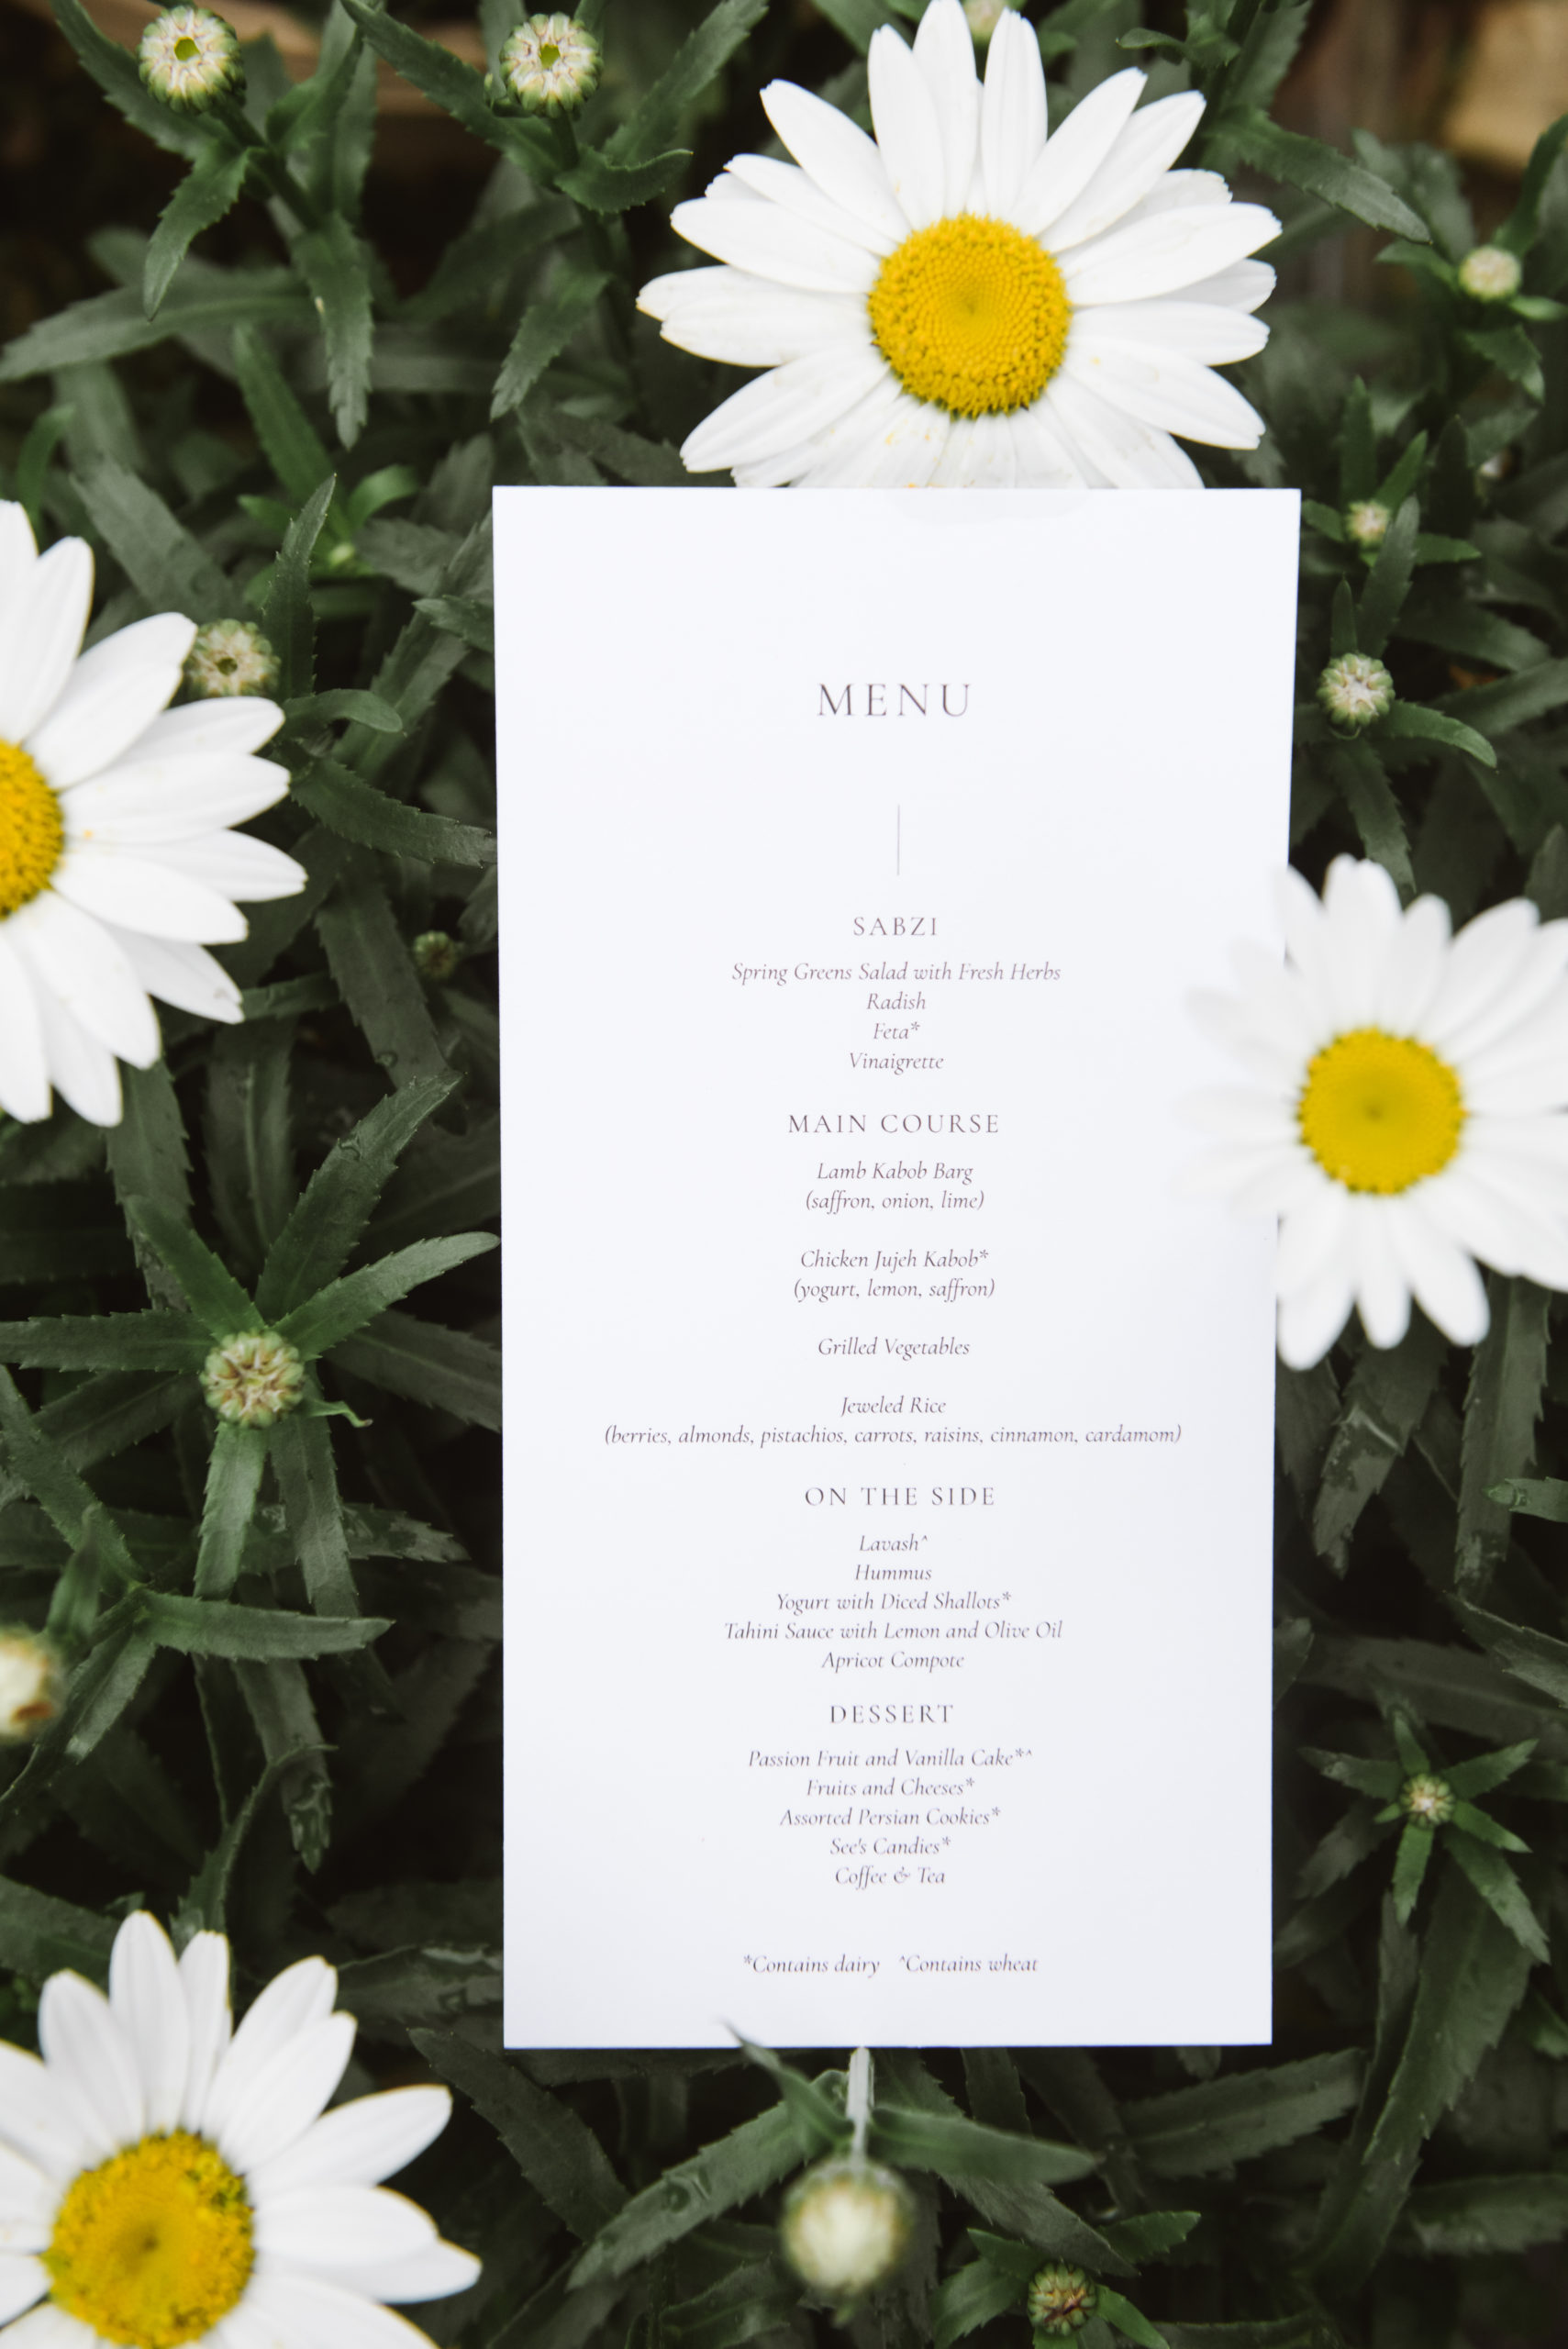 Detail of the wedding menu set atop greenery and white petal flowers.